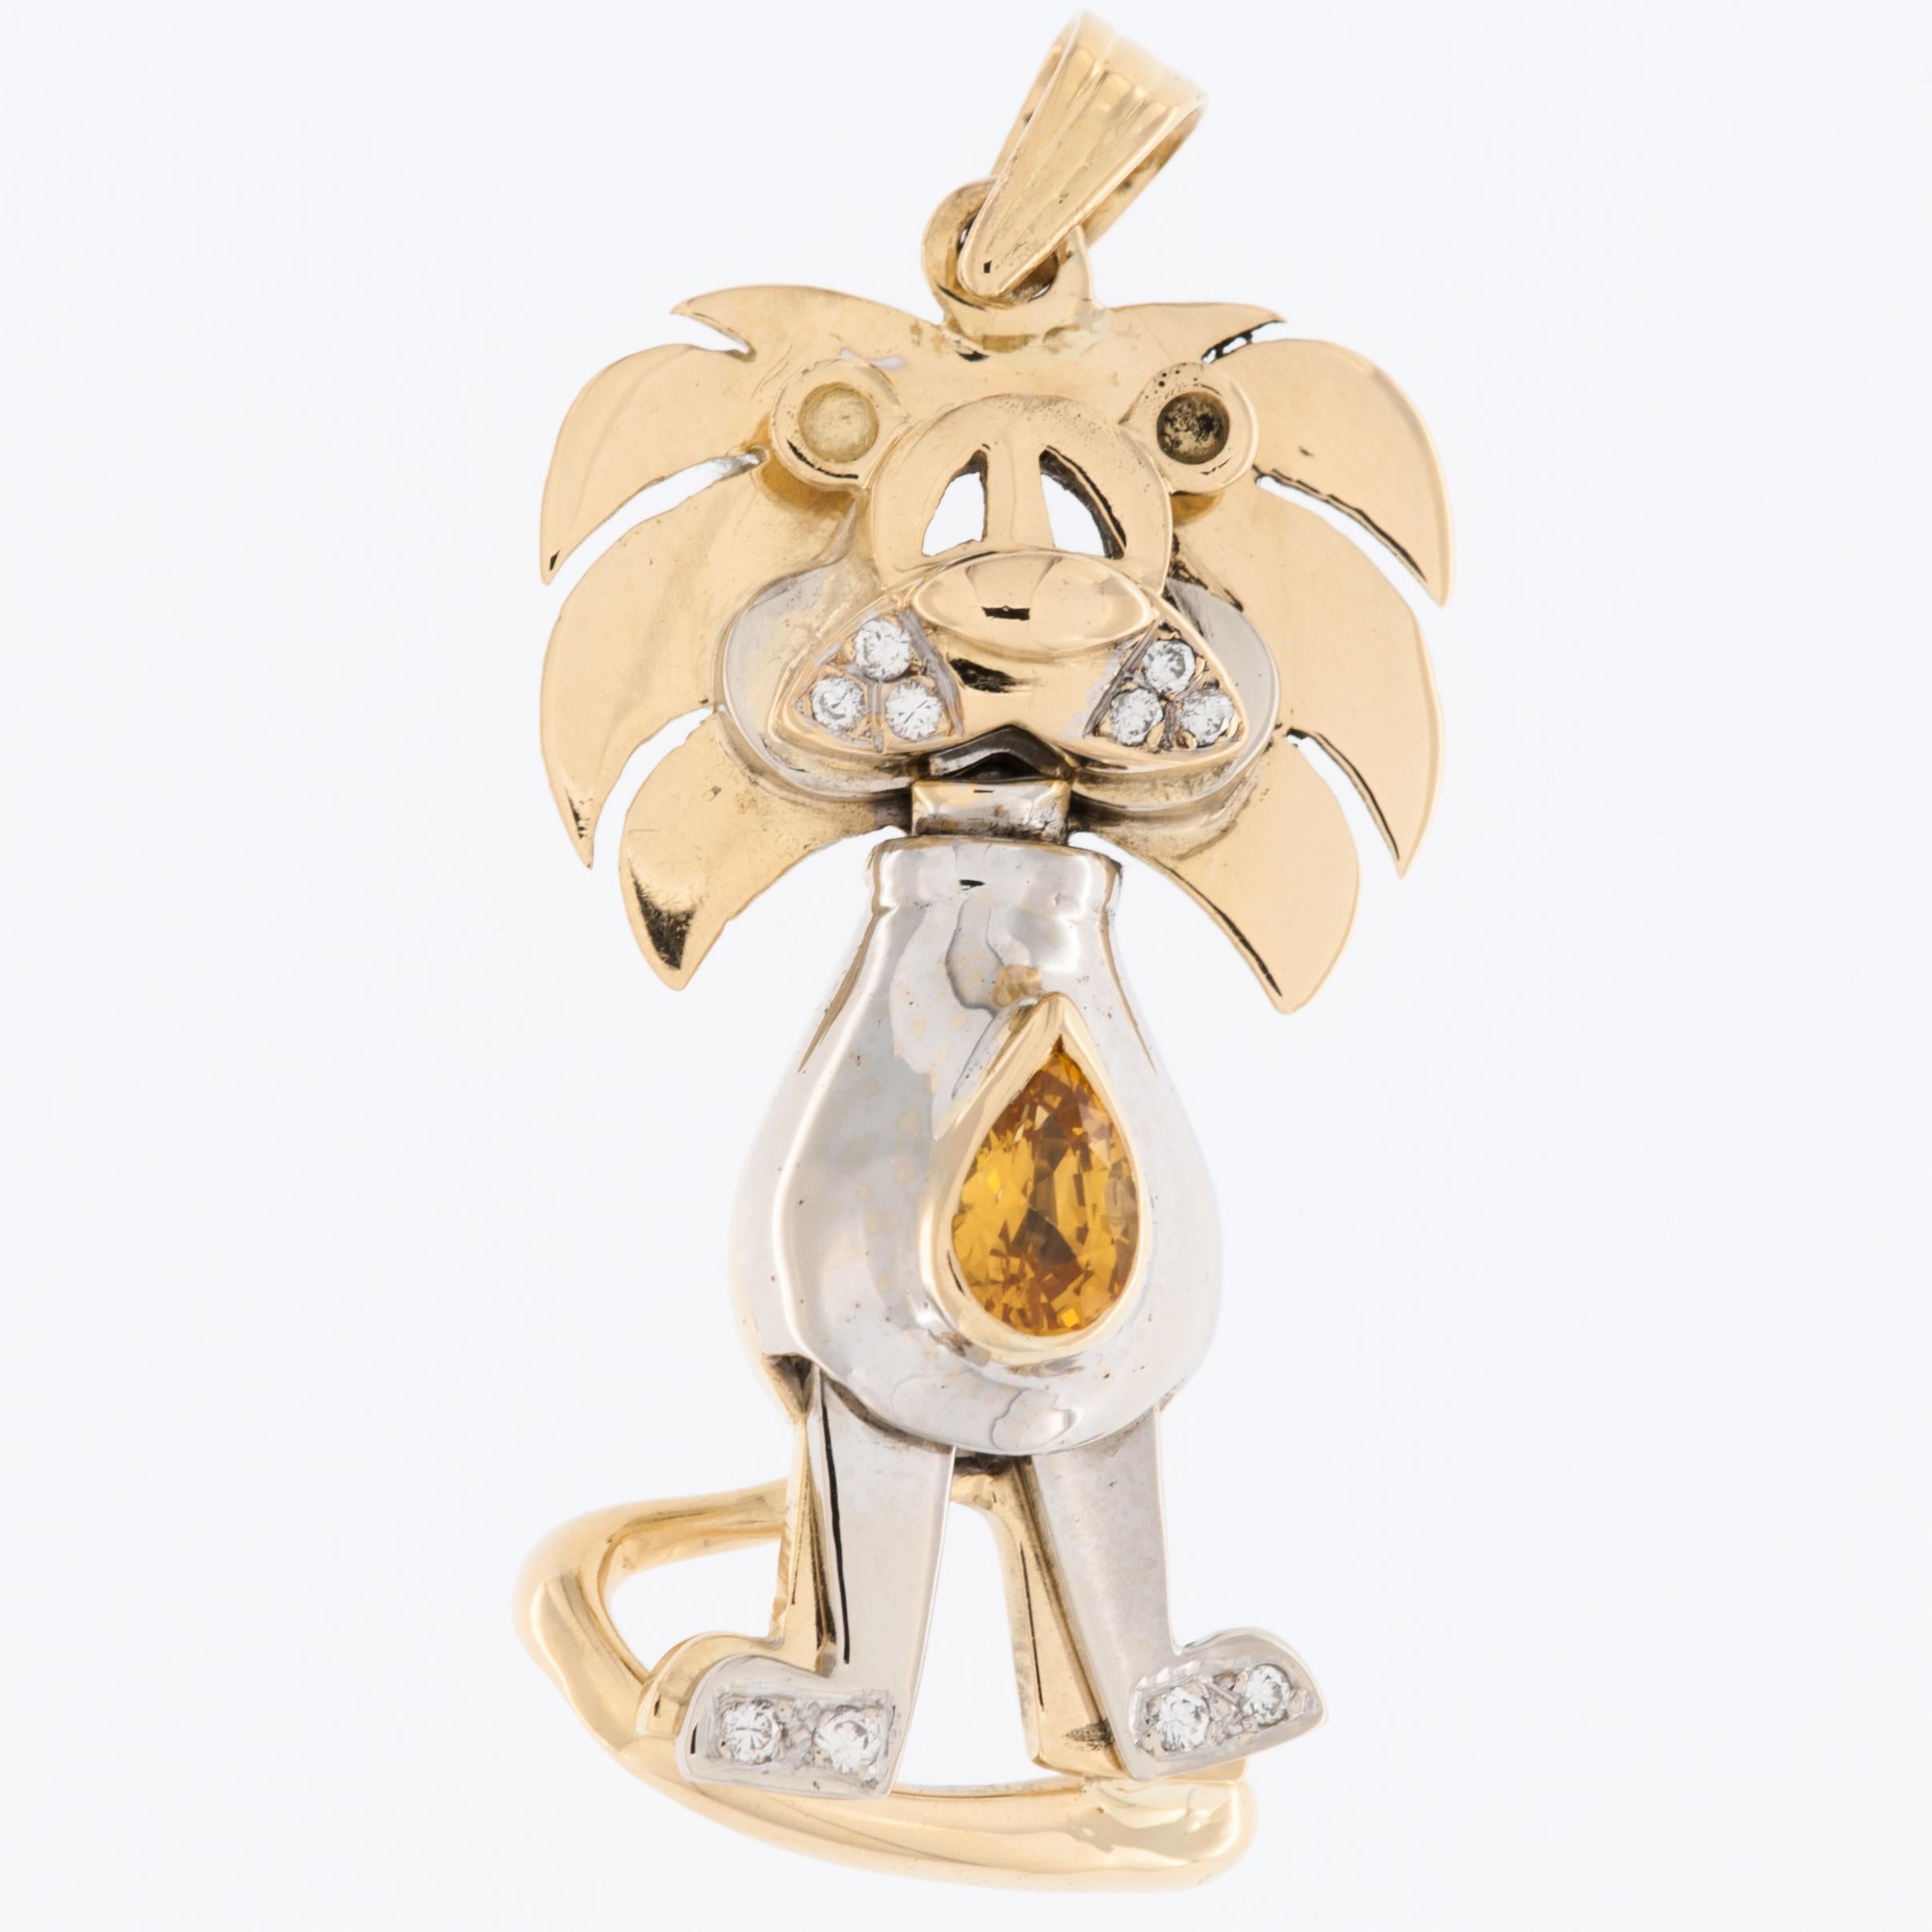 The Italian Yellow and White Gold Lion Pendant is a stunning piece of jewelry that seamlessly combines luxury and craftsmanship. This exquisite pendant is intricately crafted with a meticulous attention to detail, showcasing the artistry of Italian